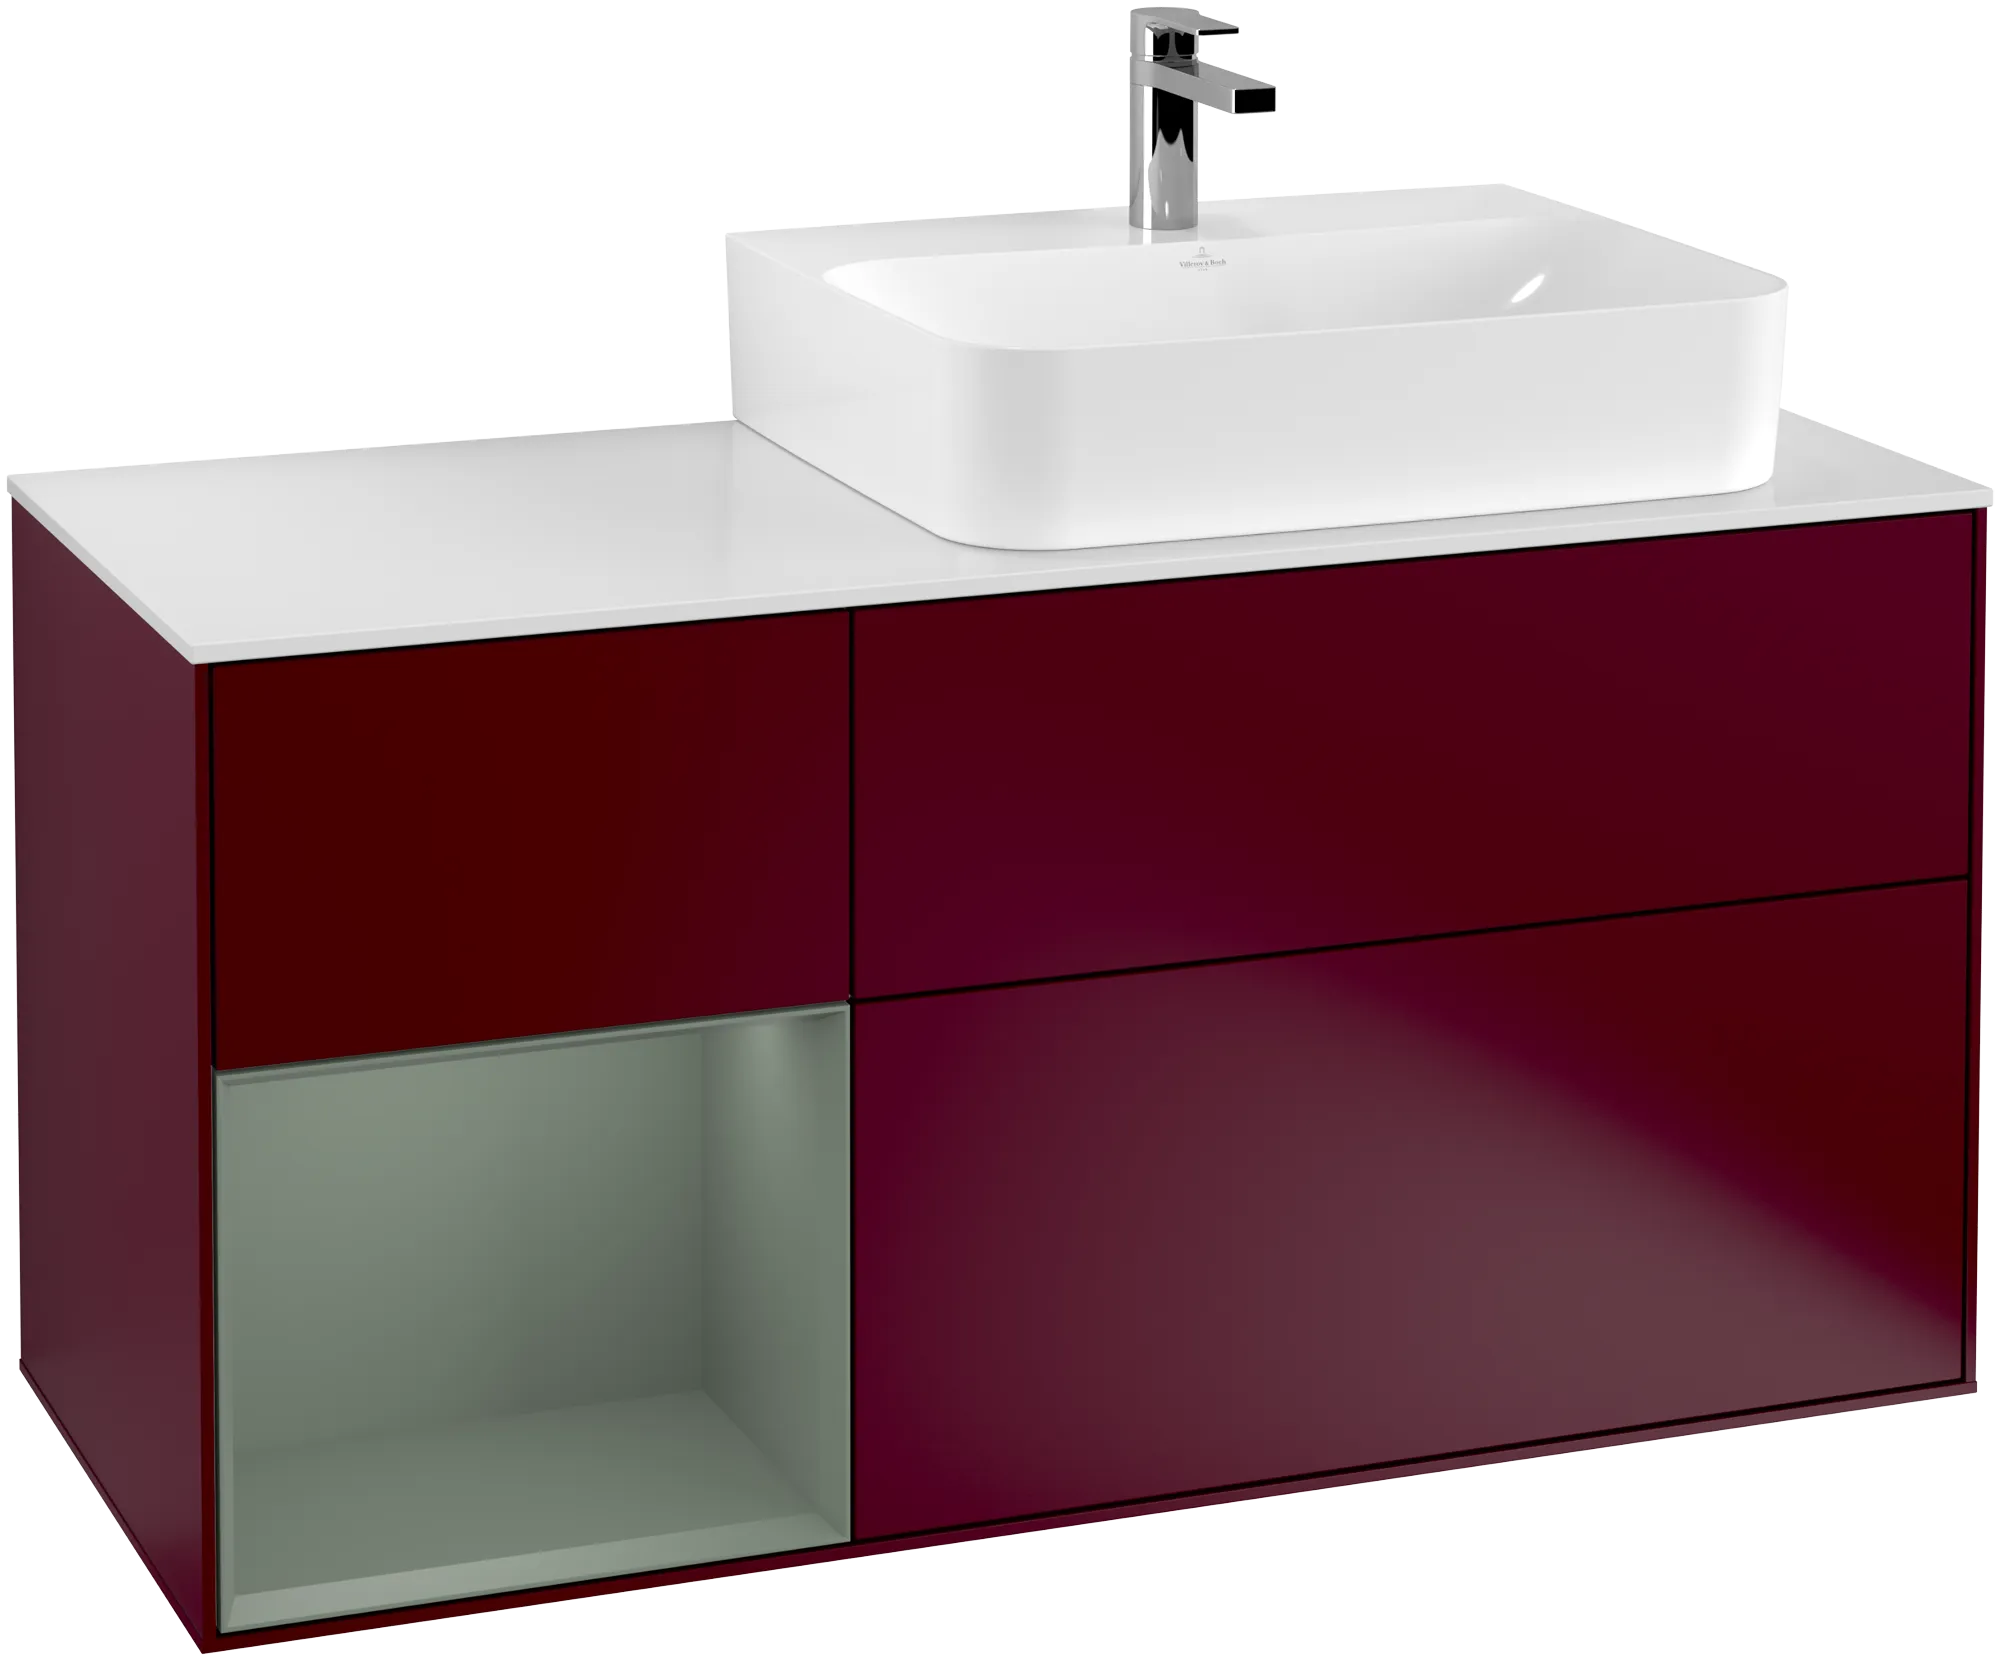 Picture of VILLEROY BOCH Finion Vanity unit, with lighting, 3 pull-out compartments, 1200 x 603 x 501 mm, Peony Matt Lacquer / Olive Matt Lacquer / Glass White Matt #G141GMHB